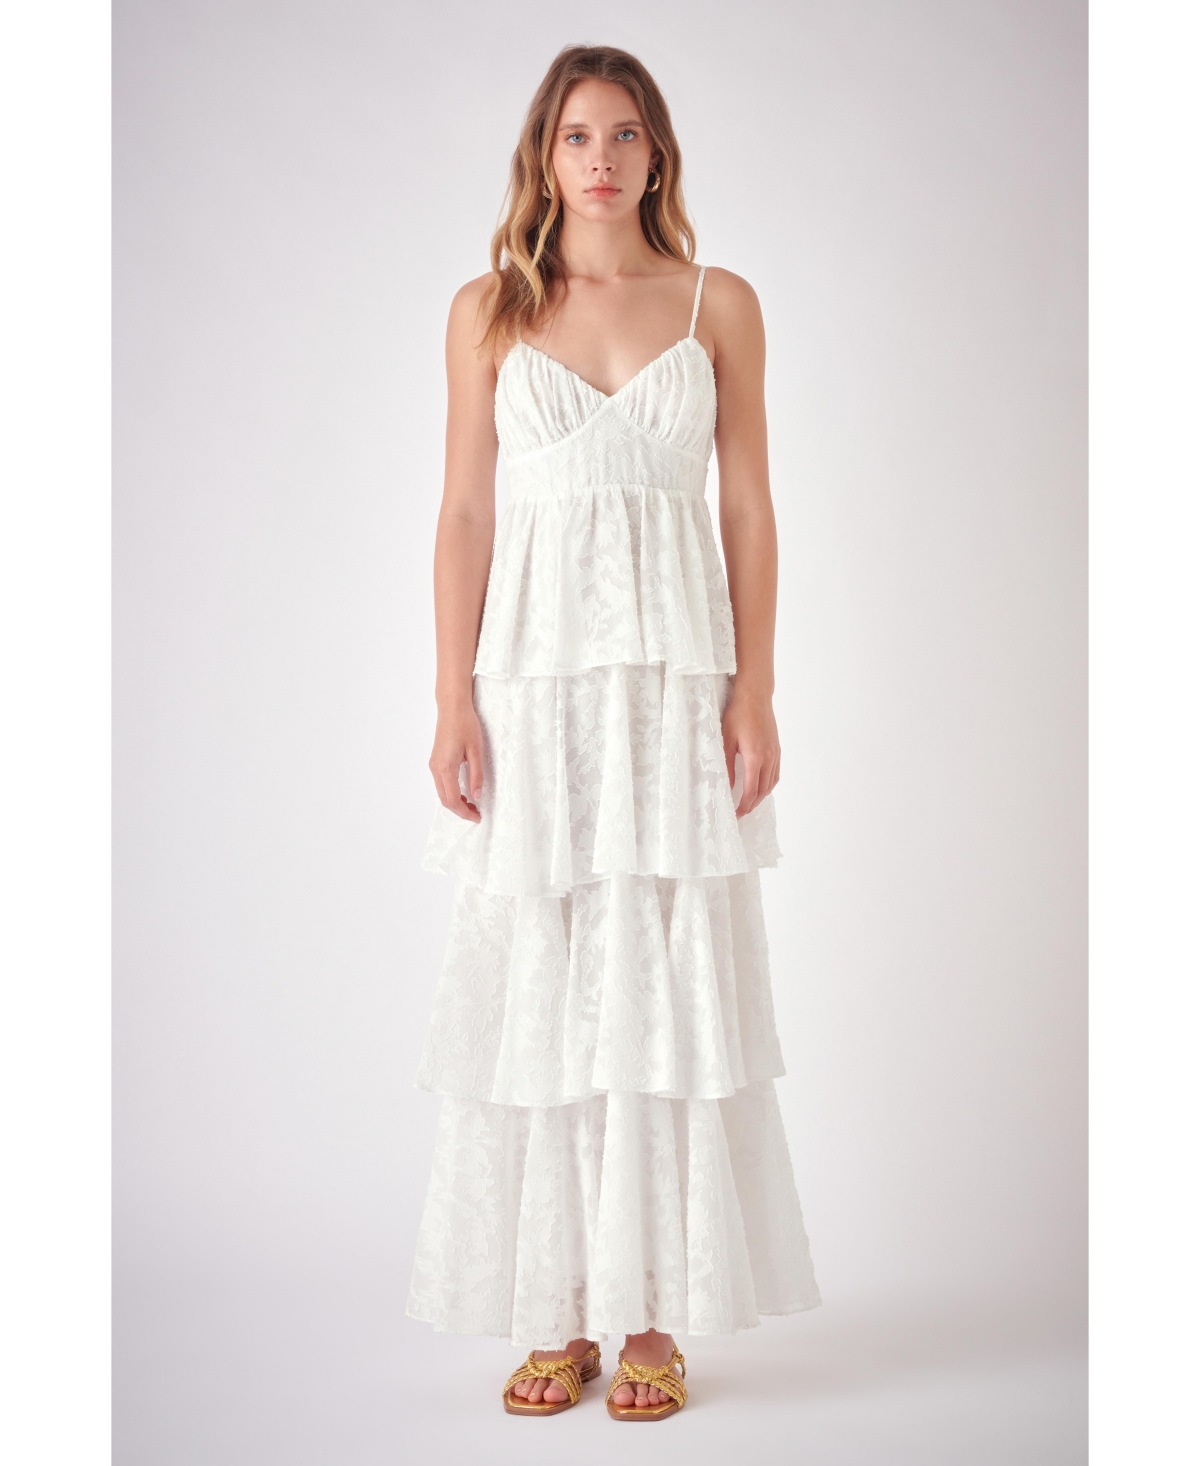 Women's Floral Jacquard Tiered Maxi Dress - White